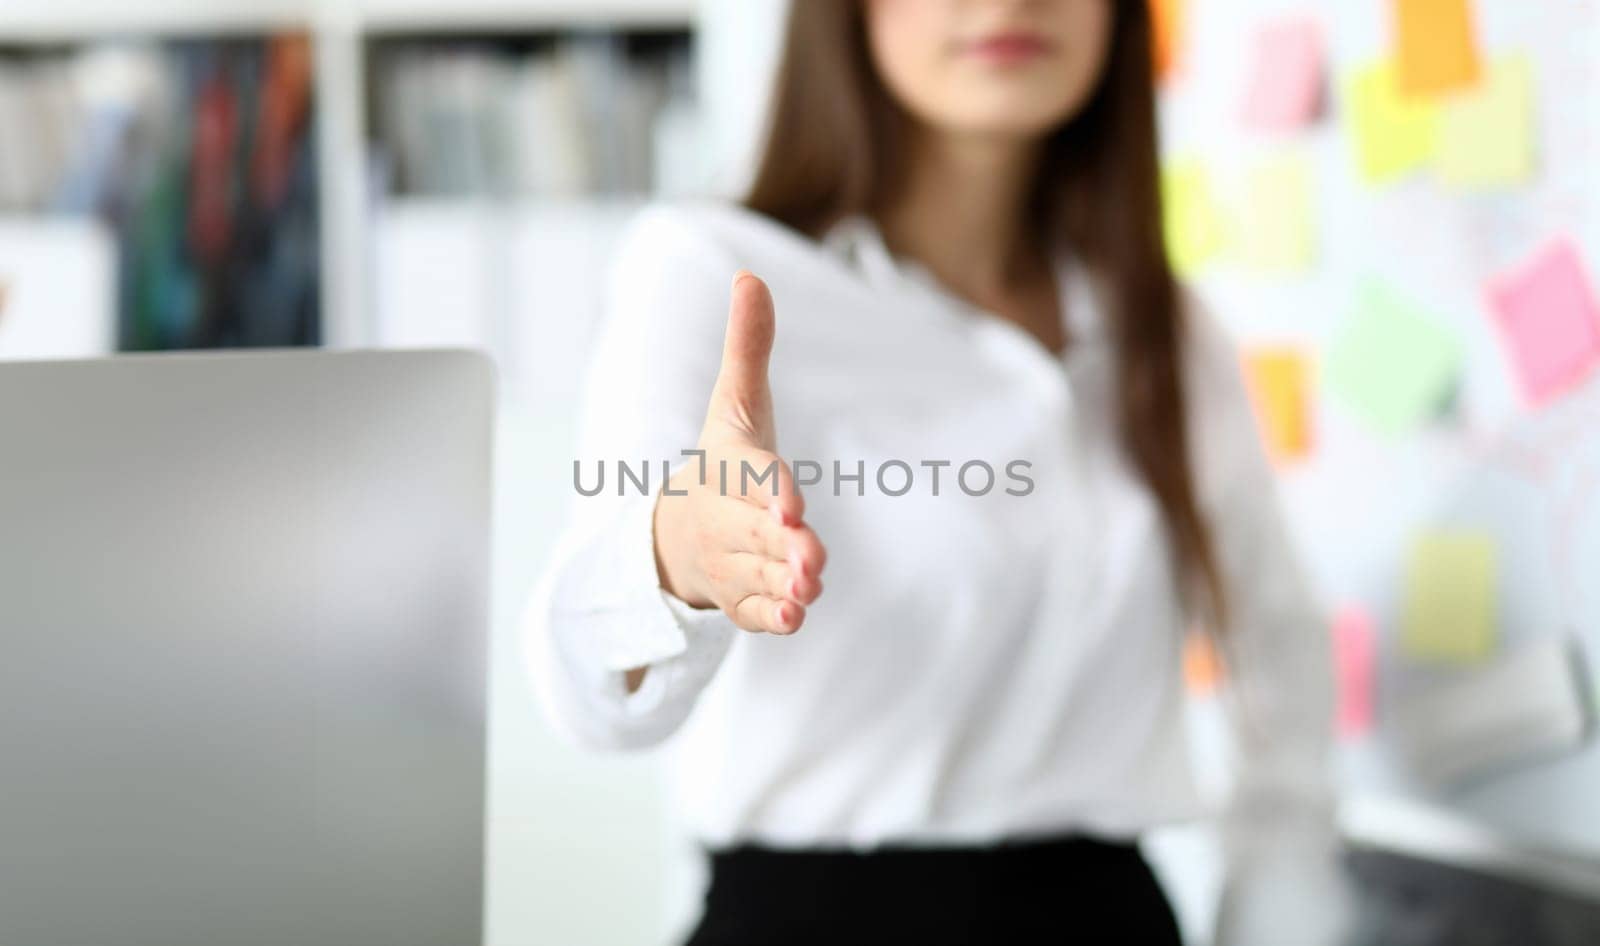 Cheerful female clerk welcoming business partner by shaking hand as sign of future achievements and prospects closeup